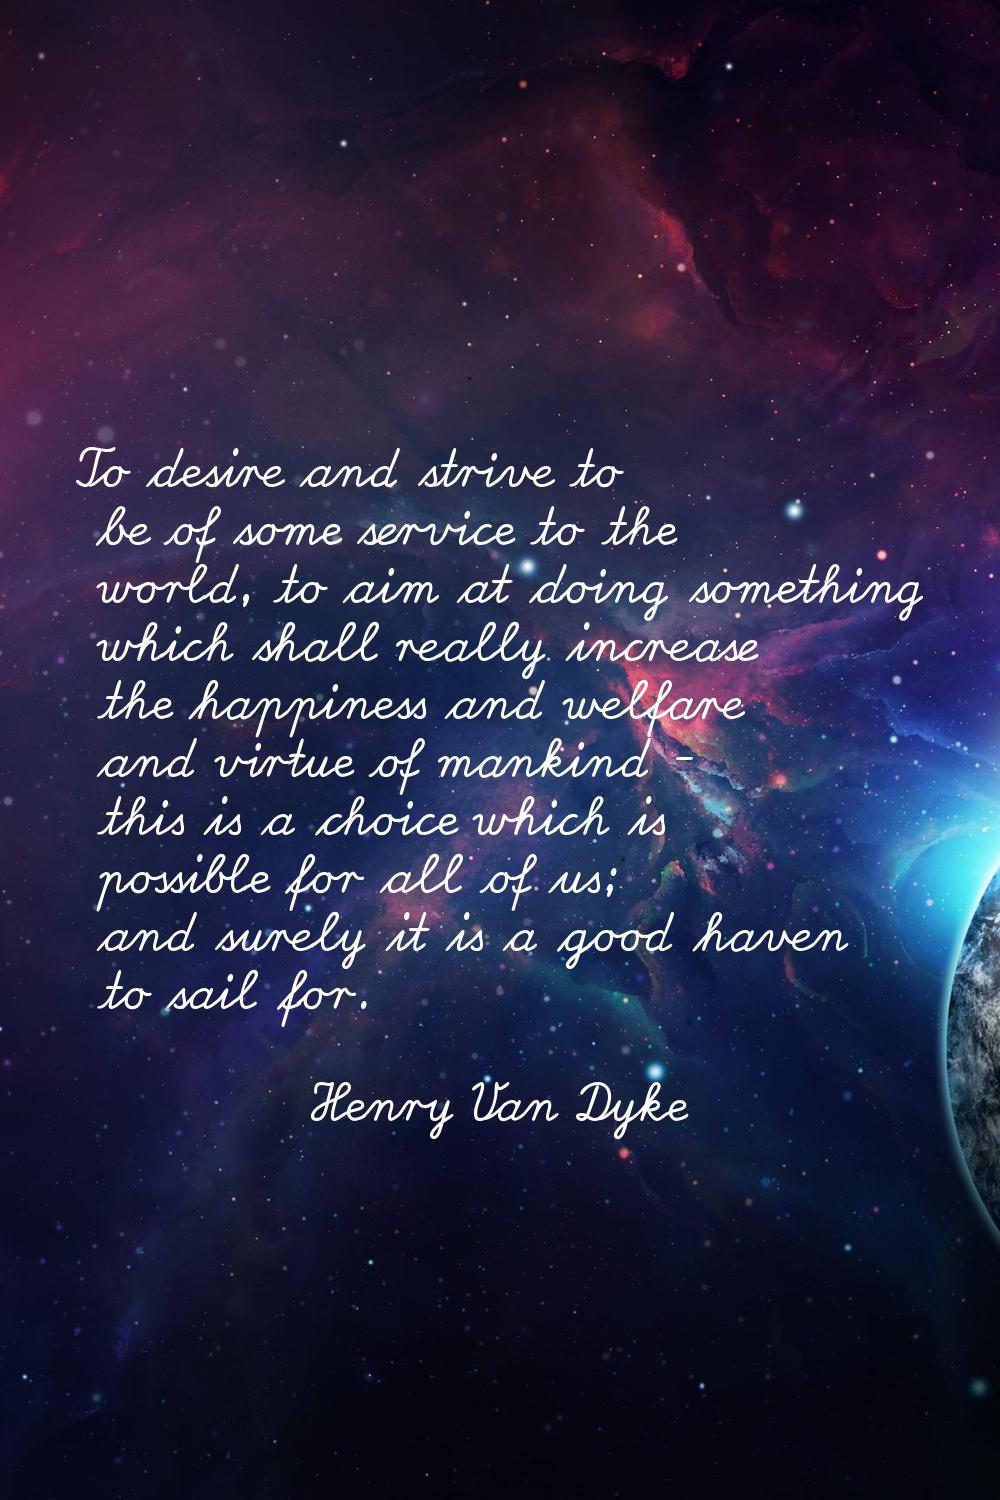 To desire and strive to be of some service to the world, to aim at doing something which shall real